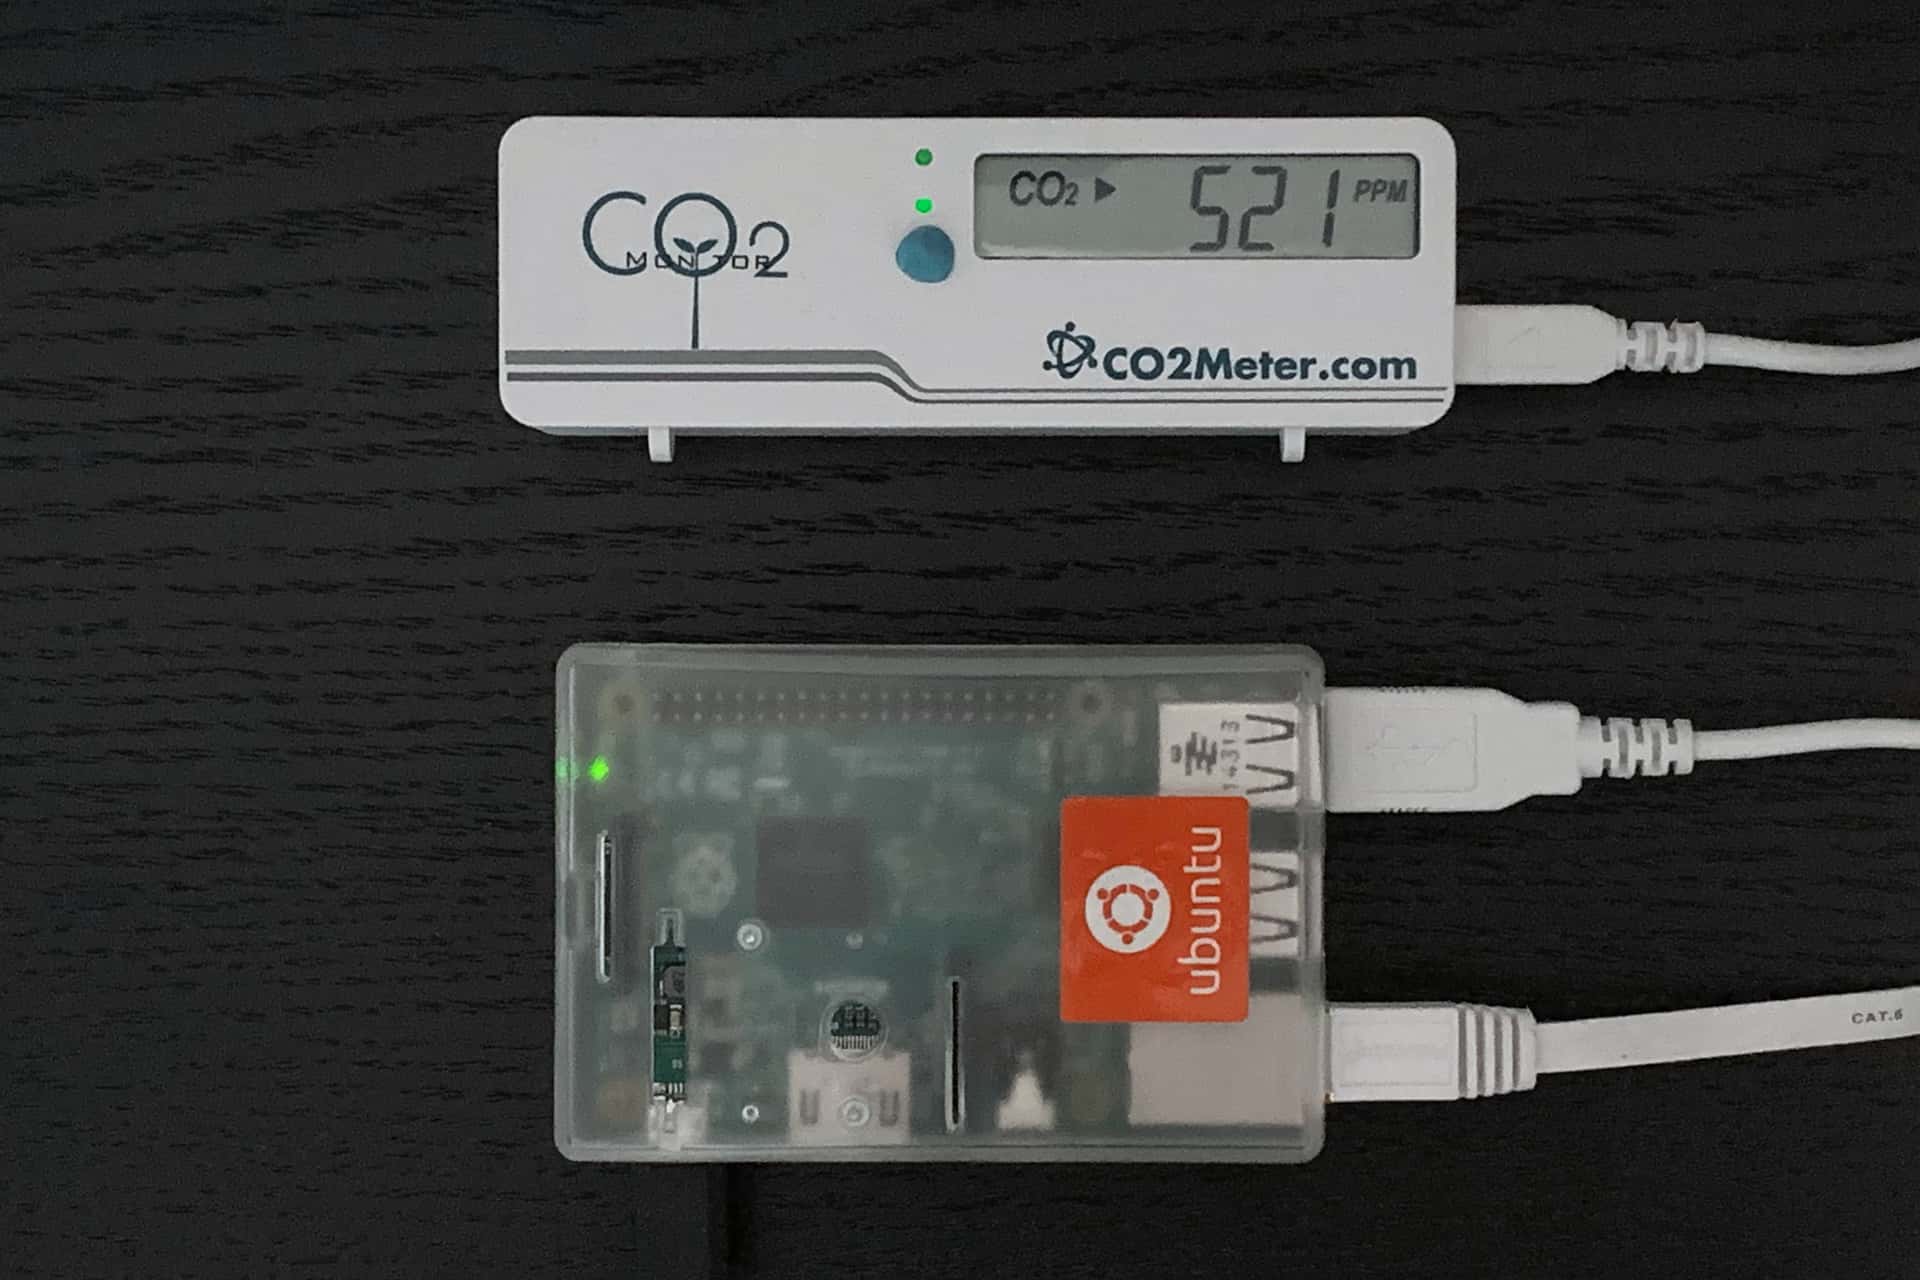 USB CO₂ meter connected to a Raspberry Pi running Ubuntu